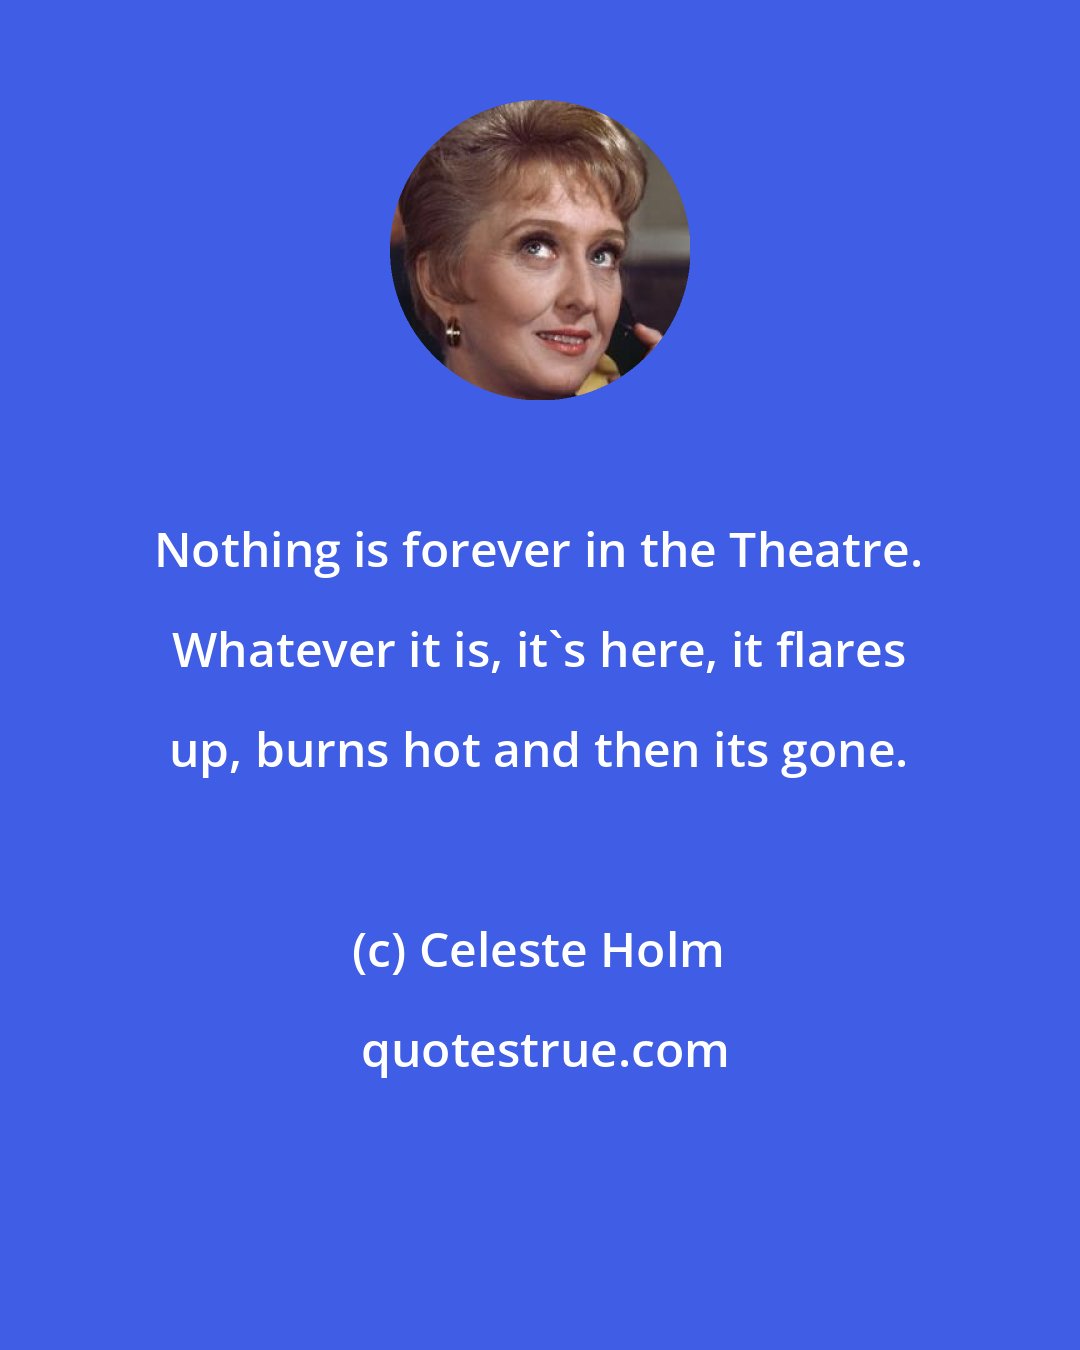 Celeste Holm: Nothing is forever in the Theatre. Whatever it is, it's here, it flares up, burns hot and then its gone.